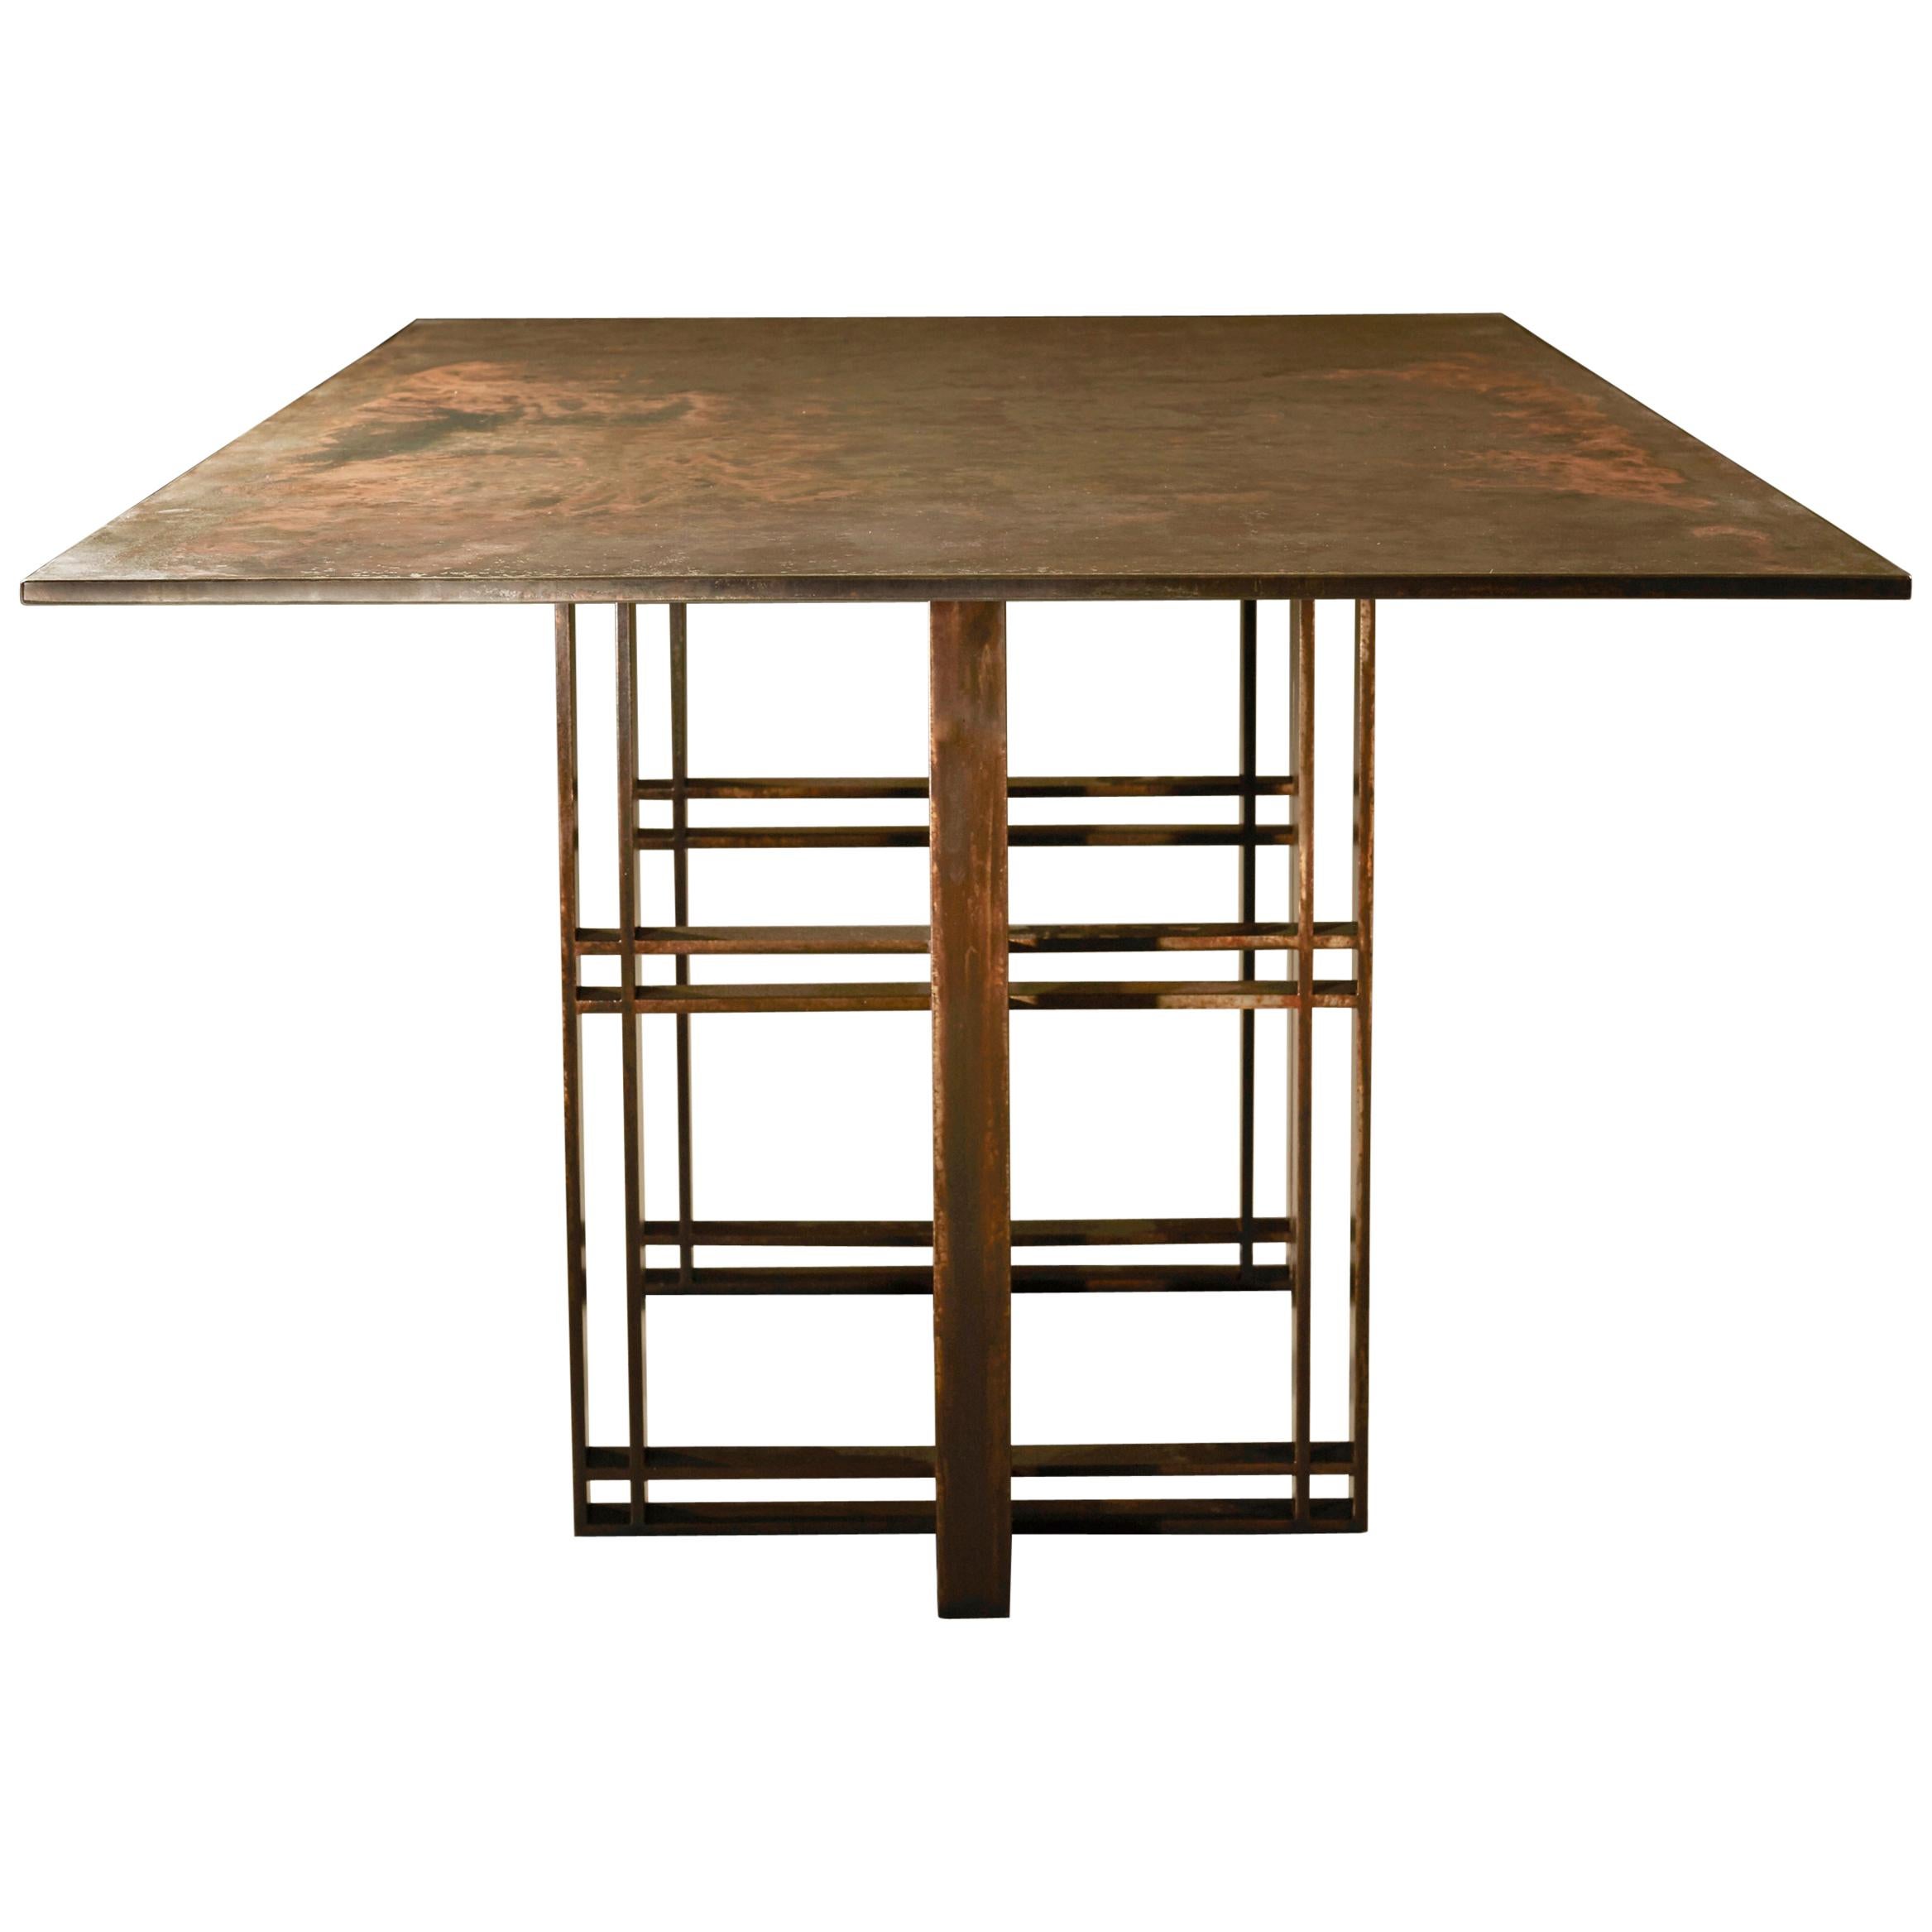 Bronze and Steel Dining Table Handcrafted and Signed by Novocastrian